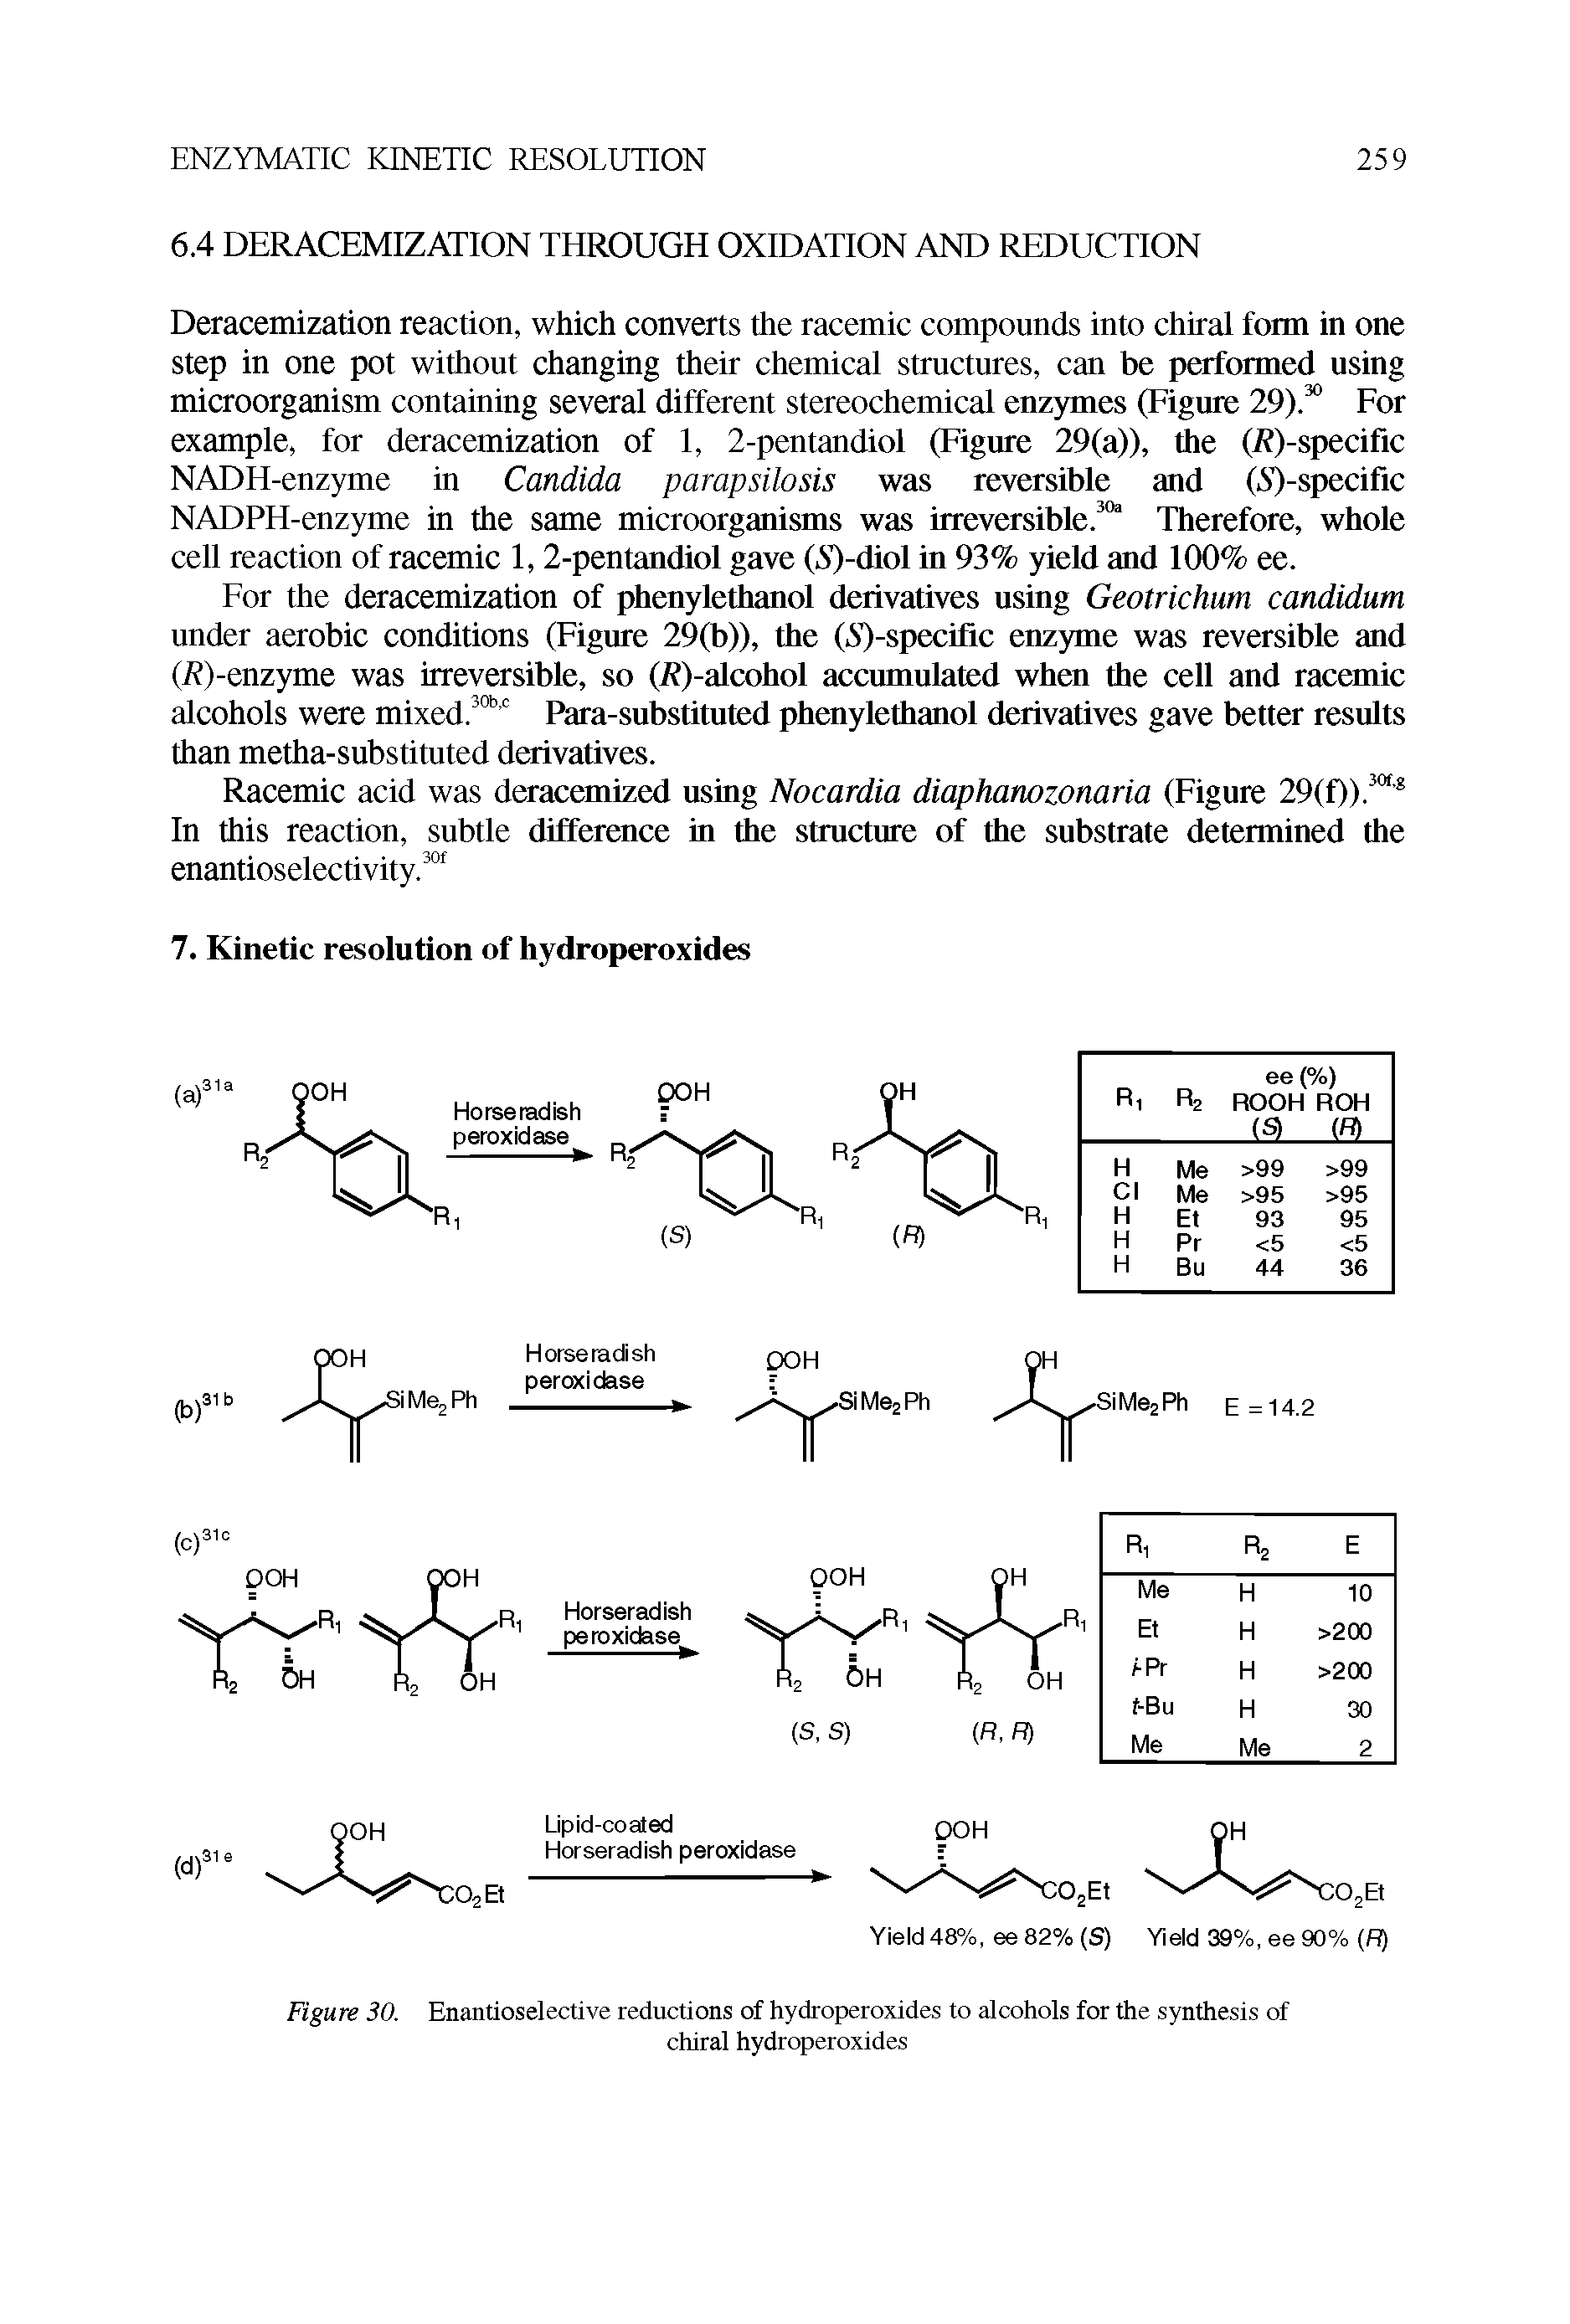 Figure 30. Enantioselective reductions of hydroperoxides to alcohols for the synthesis of...